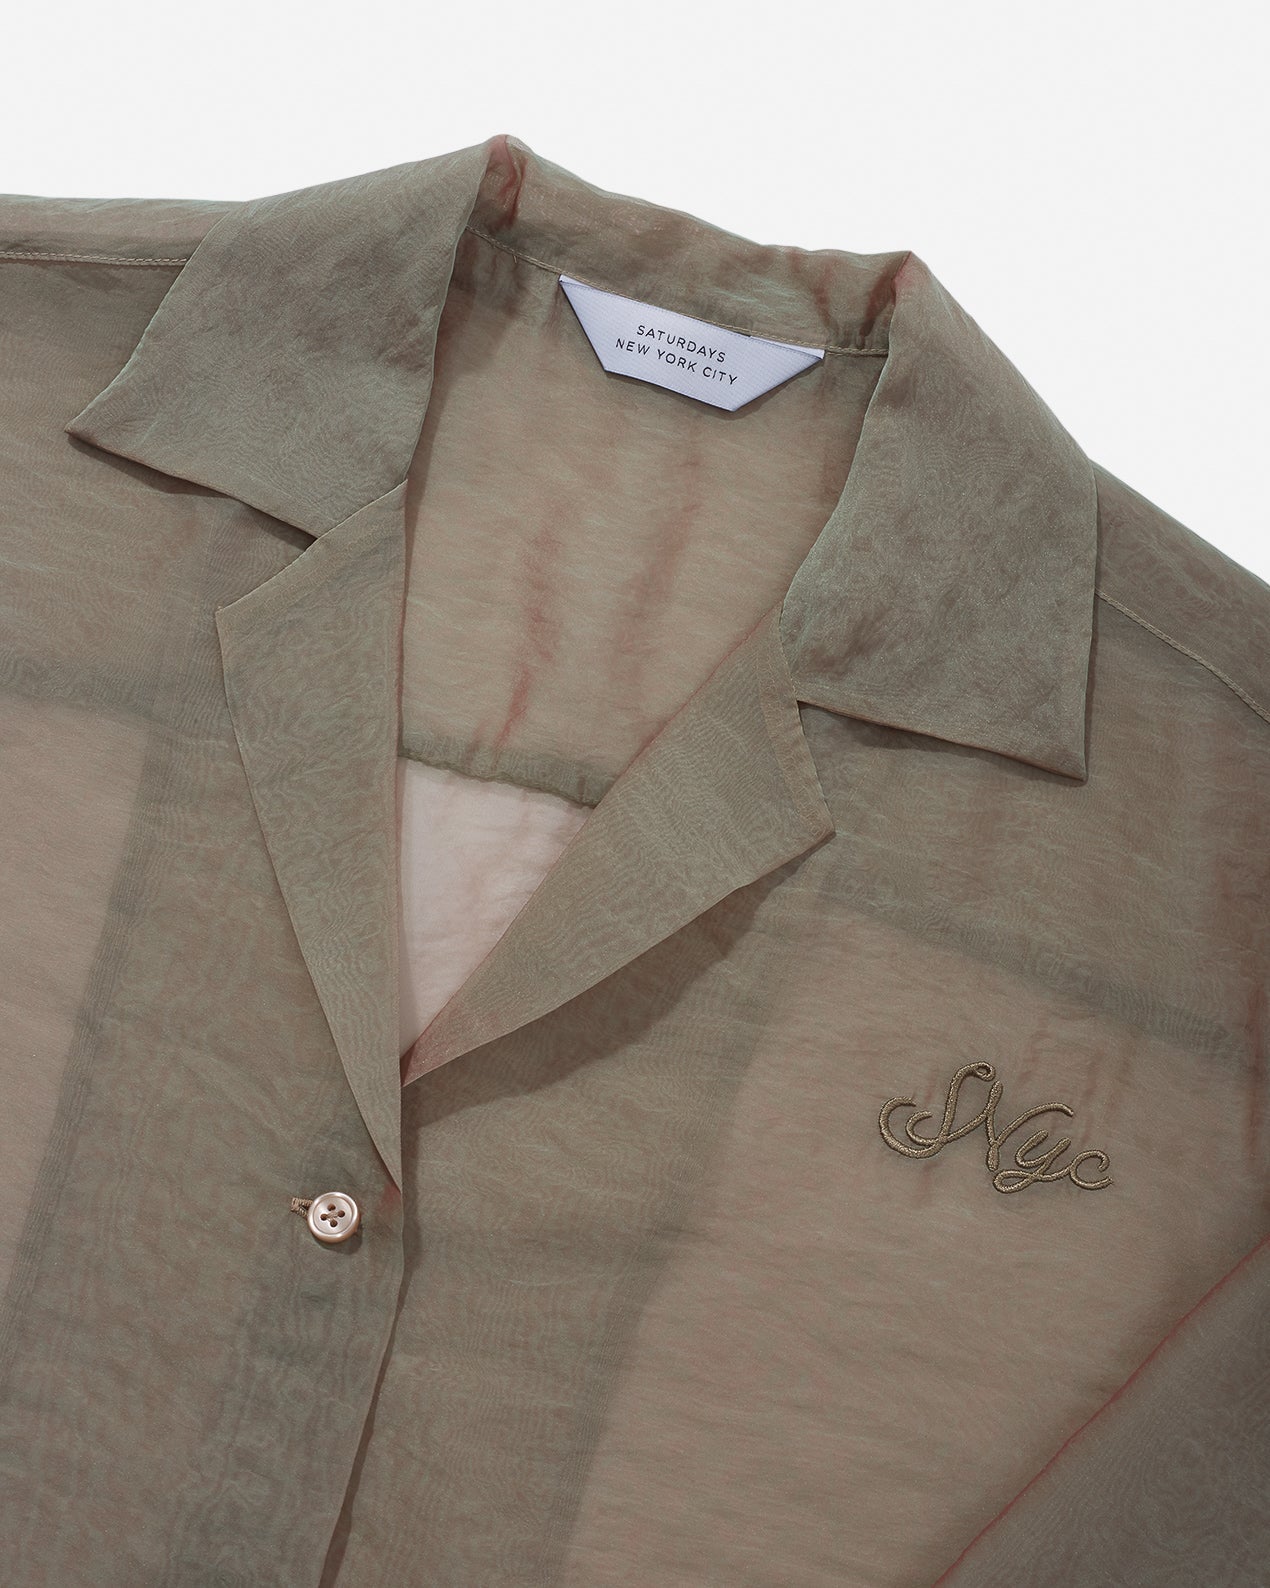 Crys Sheer Embroidered Shirt | Saturdays NYC